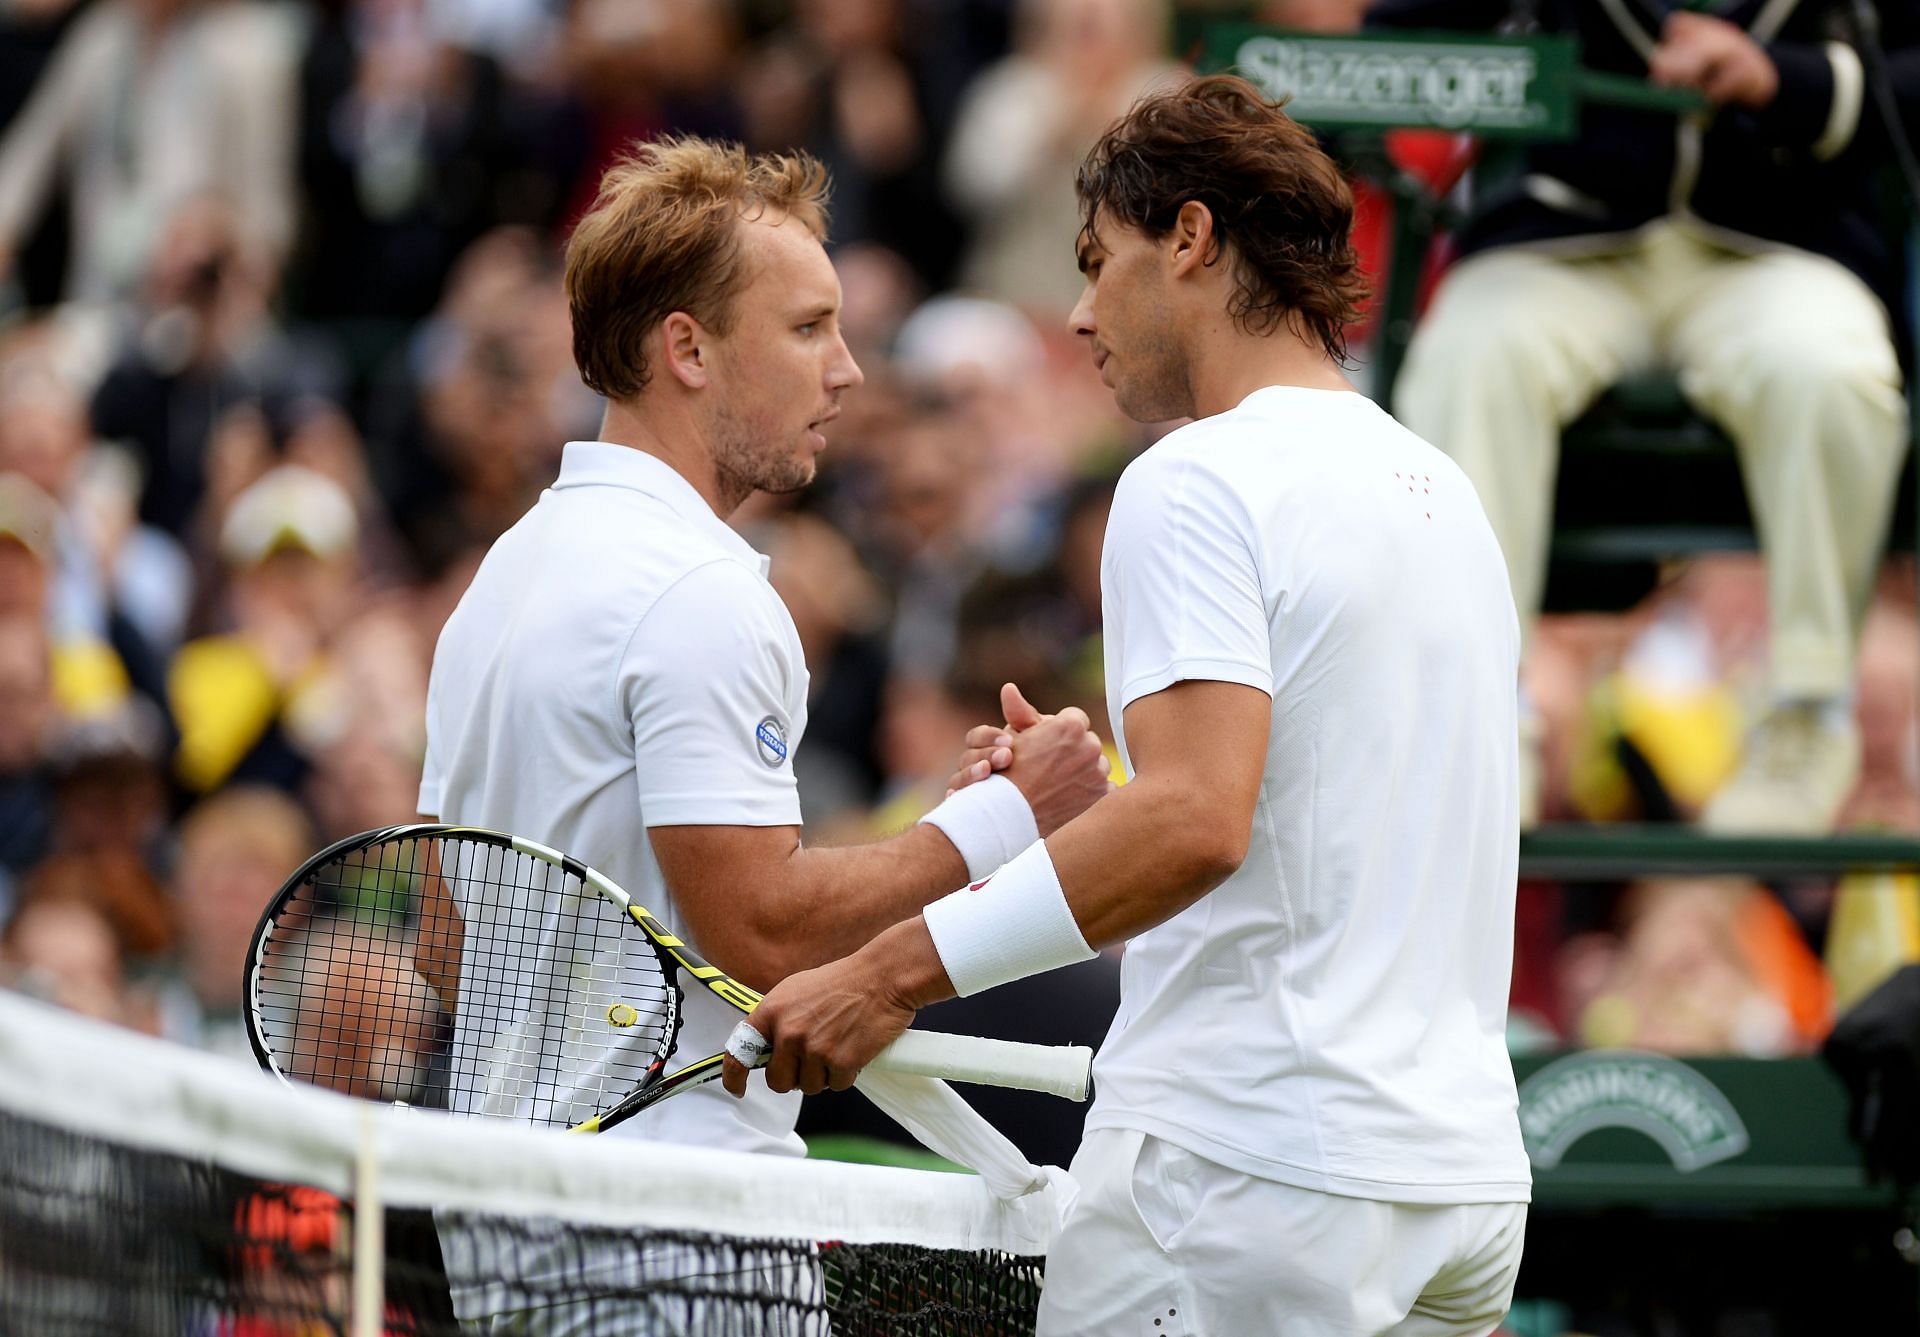 Rafael Nadal and Steve Darcis at the net of the Championships - 2013